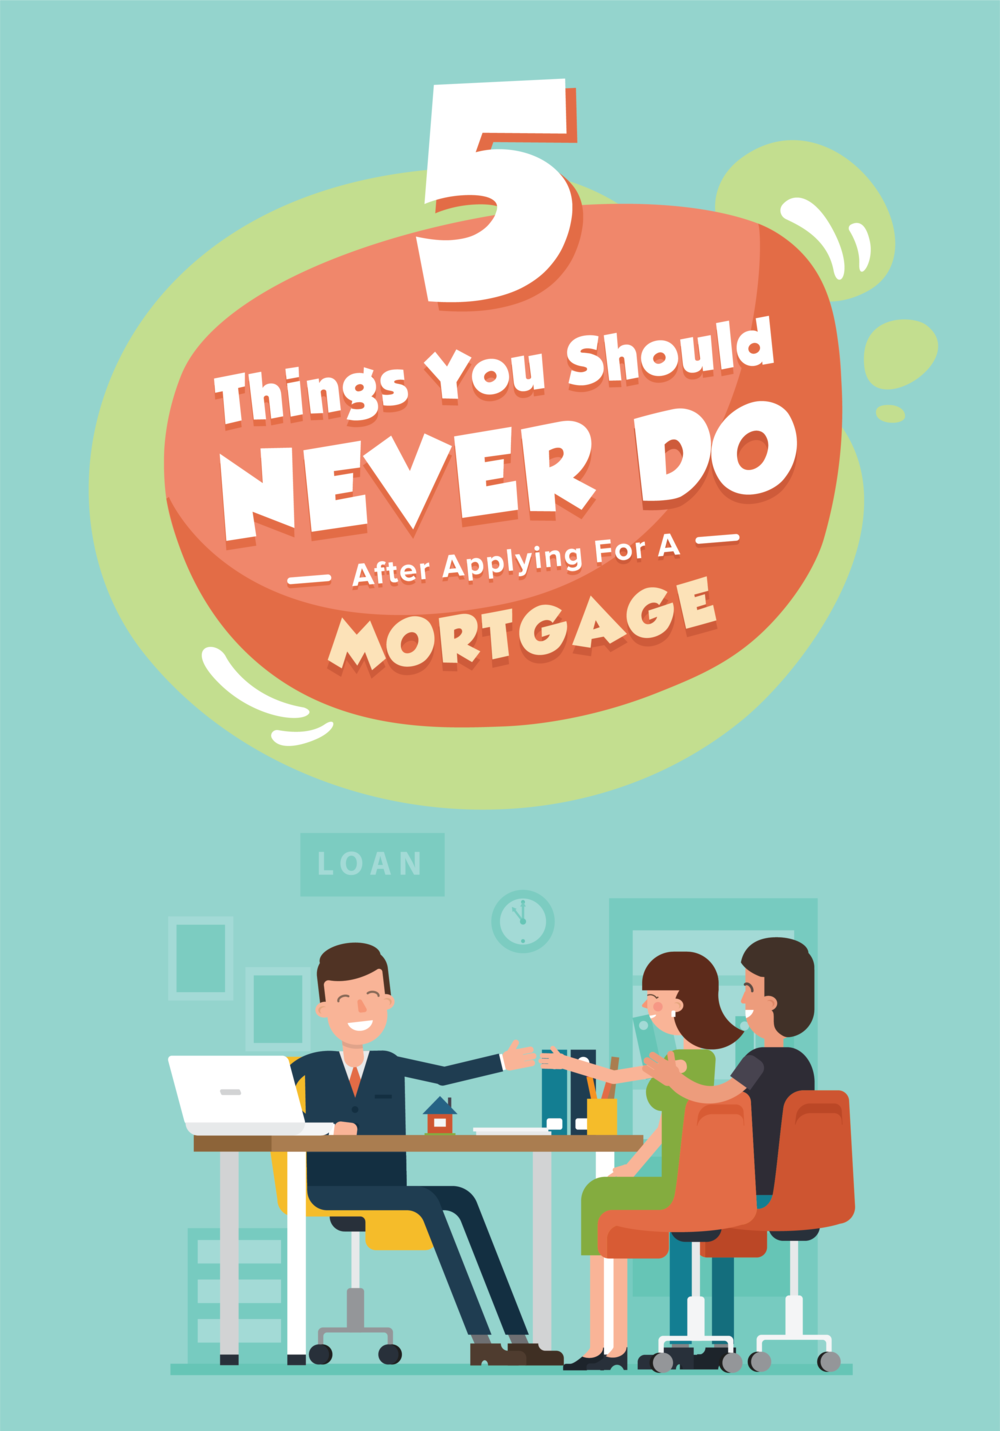 5 Things You Should Never Do After Applying For A Mortgage